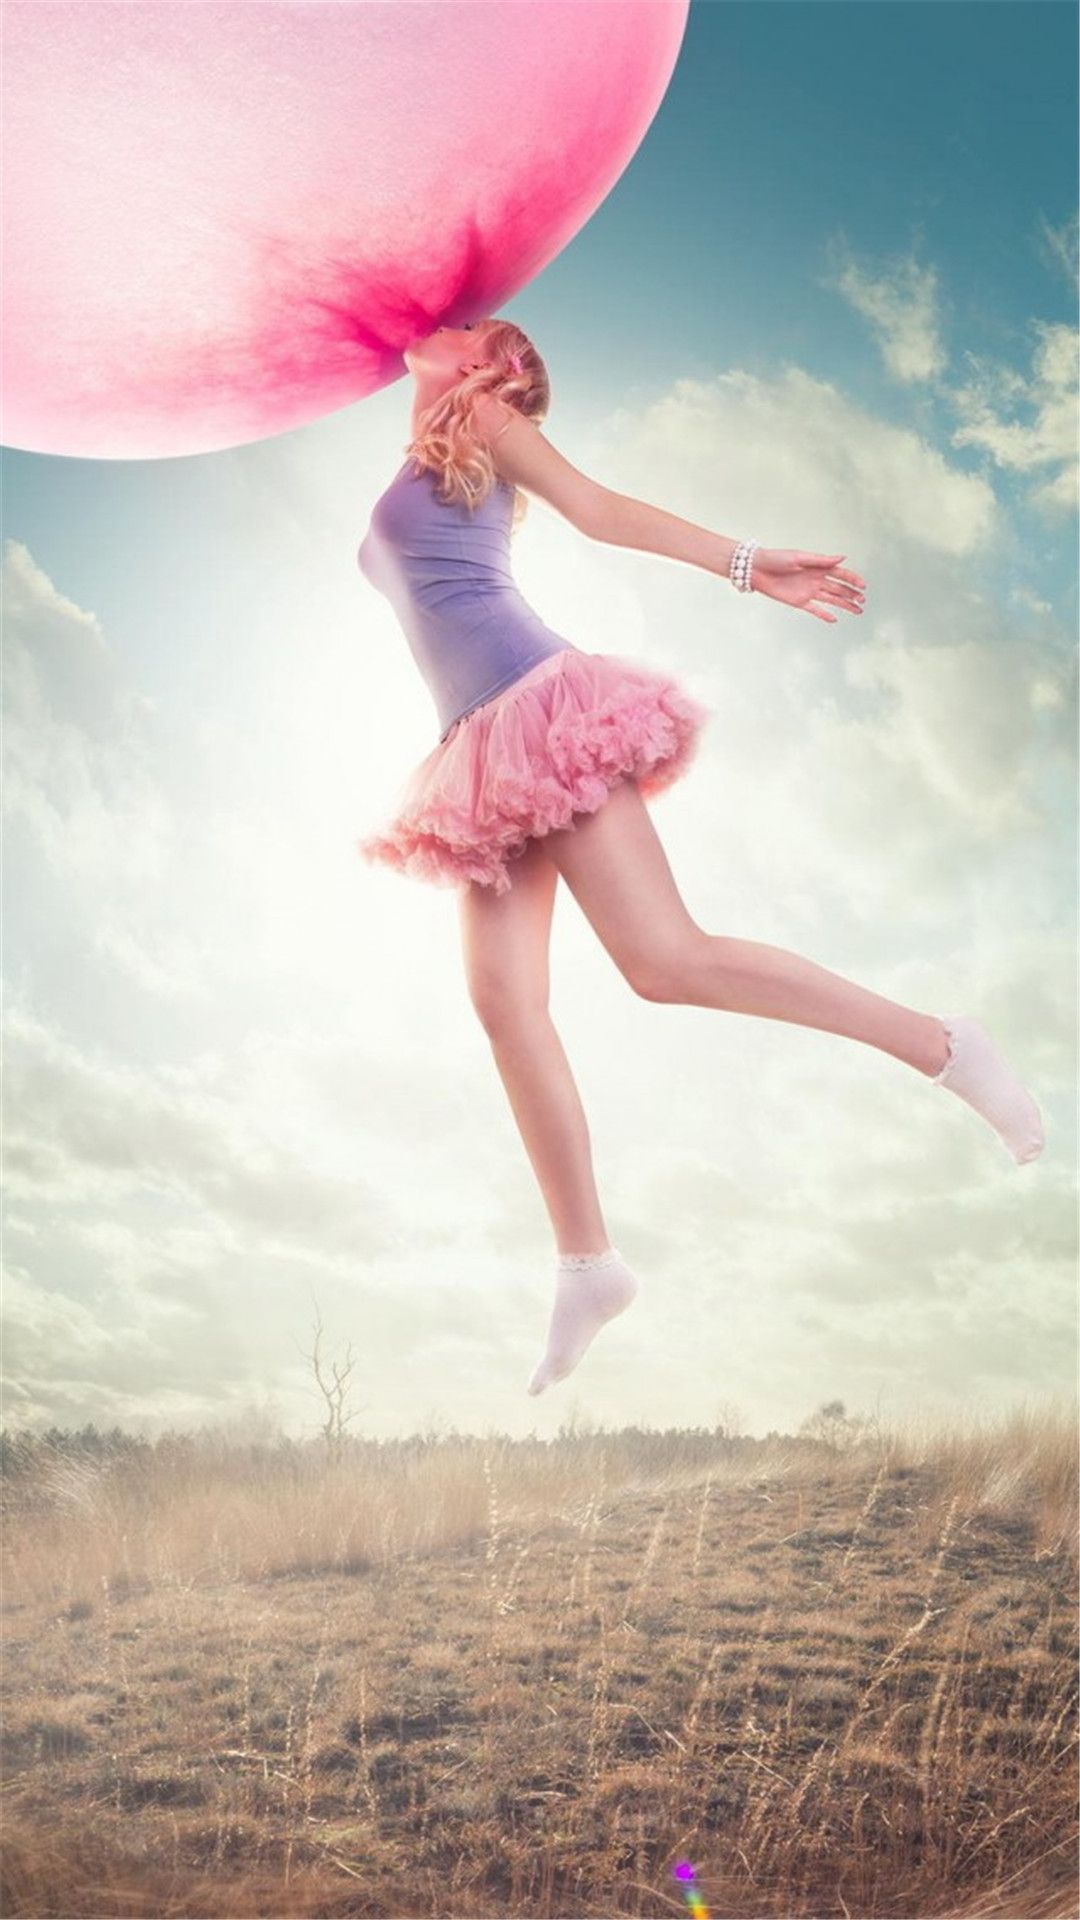 Dreamy Sport Young Jump Pink Balloon iPhone 8 Wallpaper Free Download